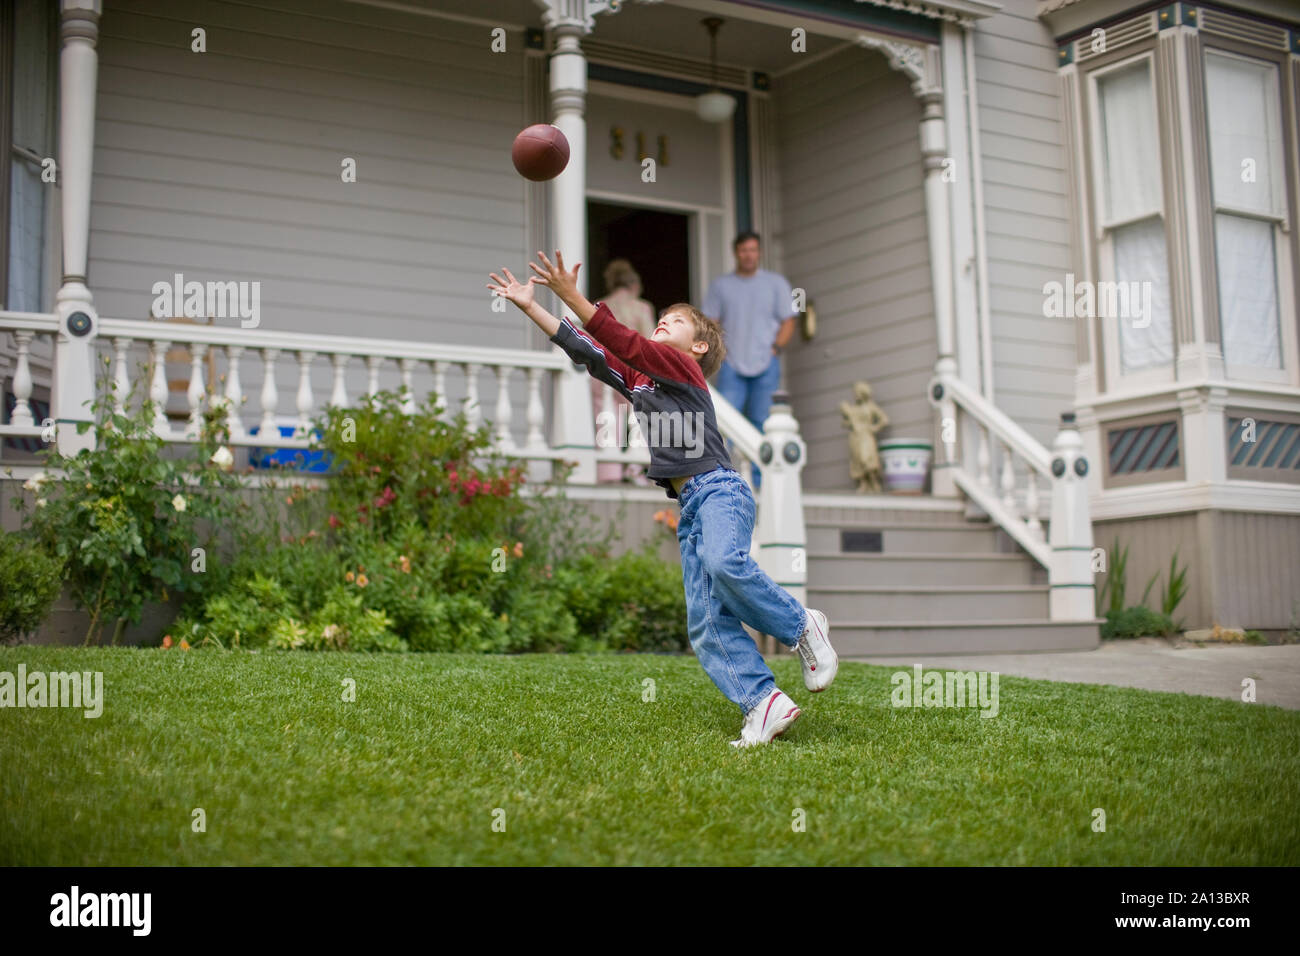 Young boy reaching up to catch a football in the front yard of his home. Stock Photo